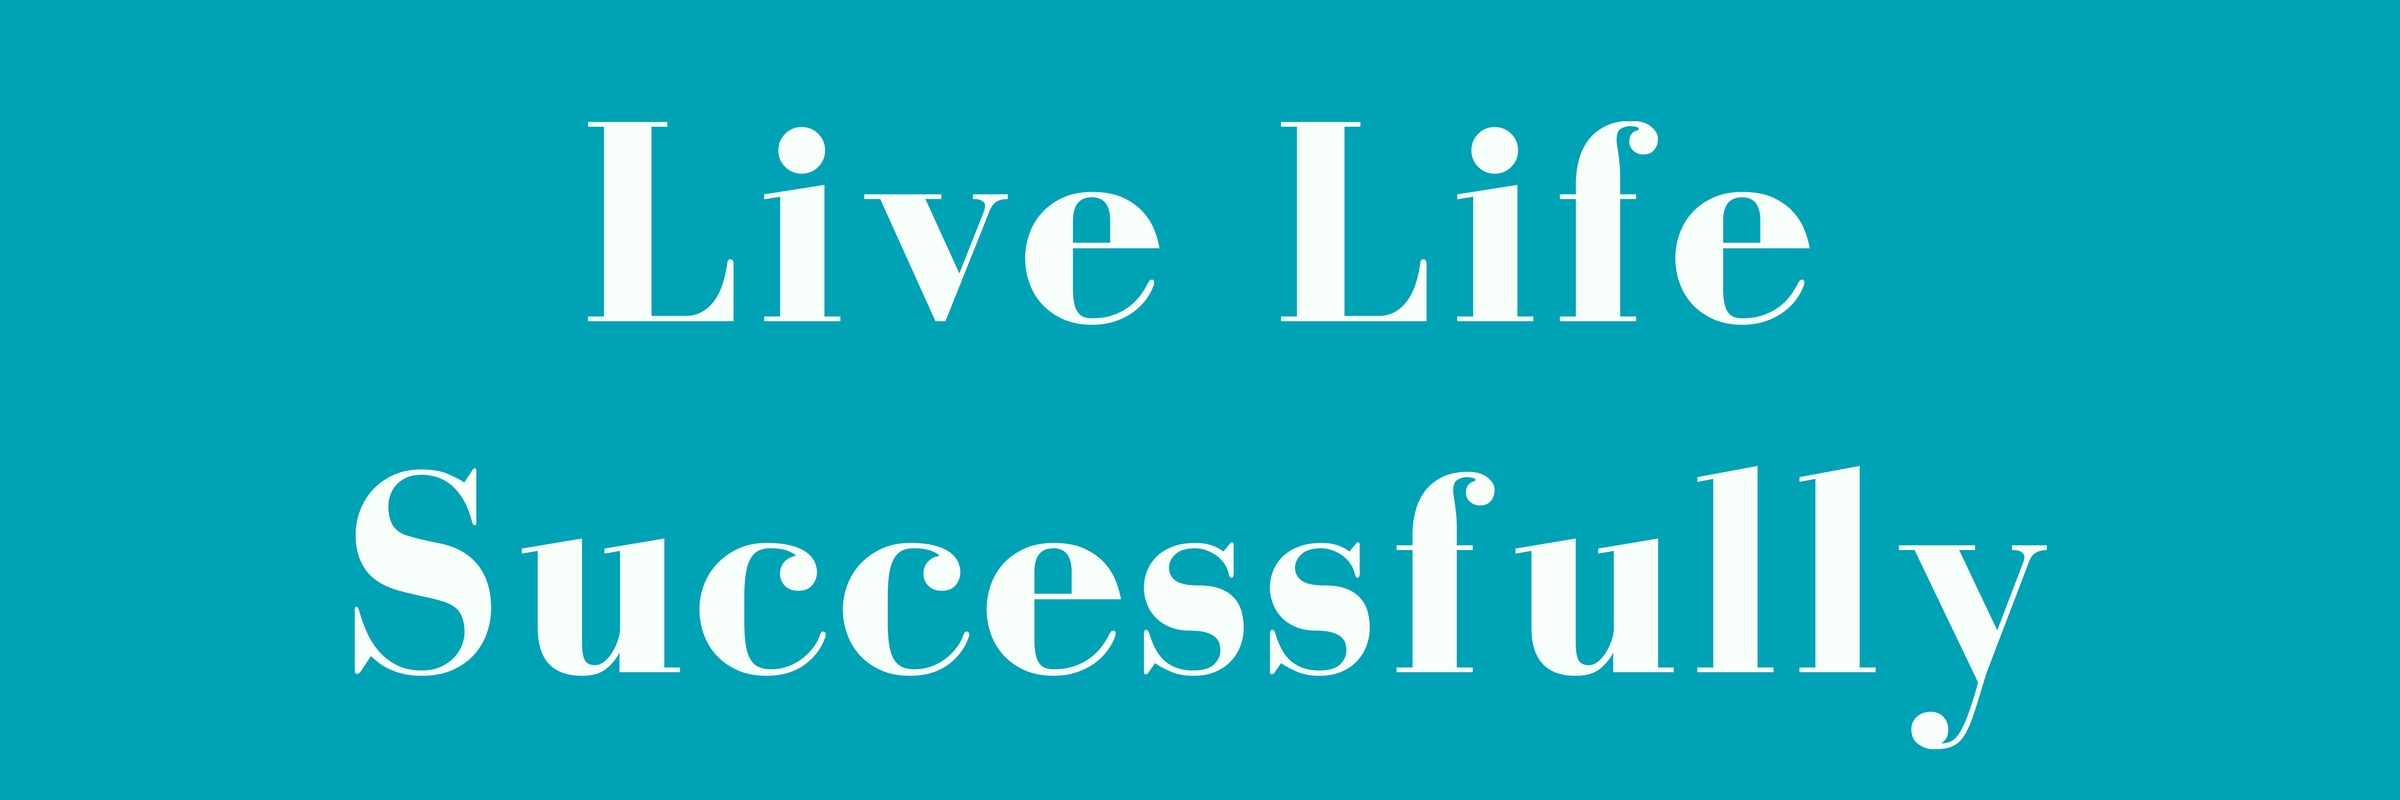 live-life-successfully-elegance